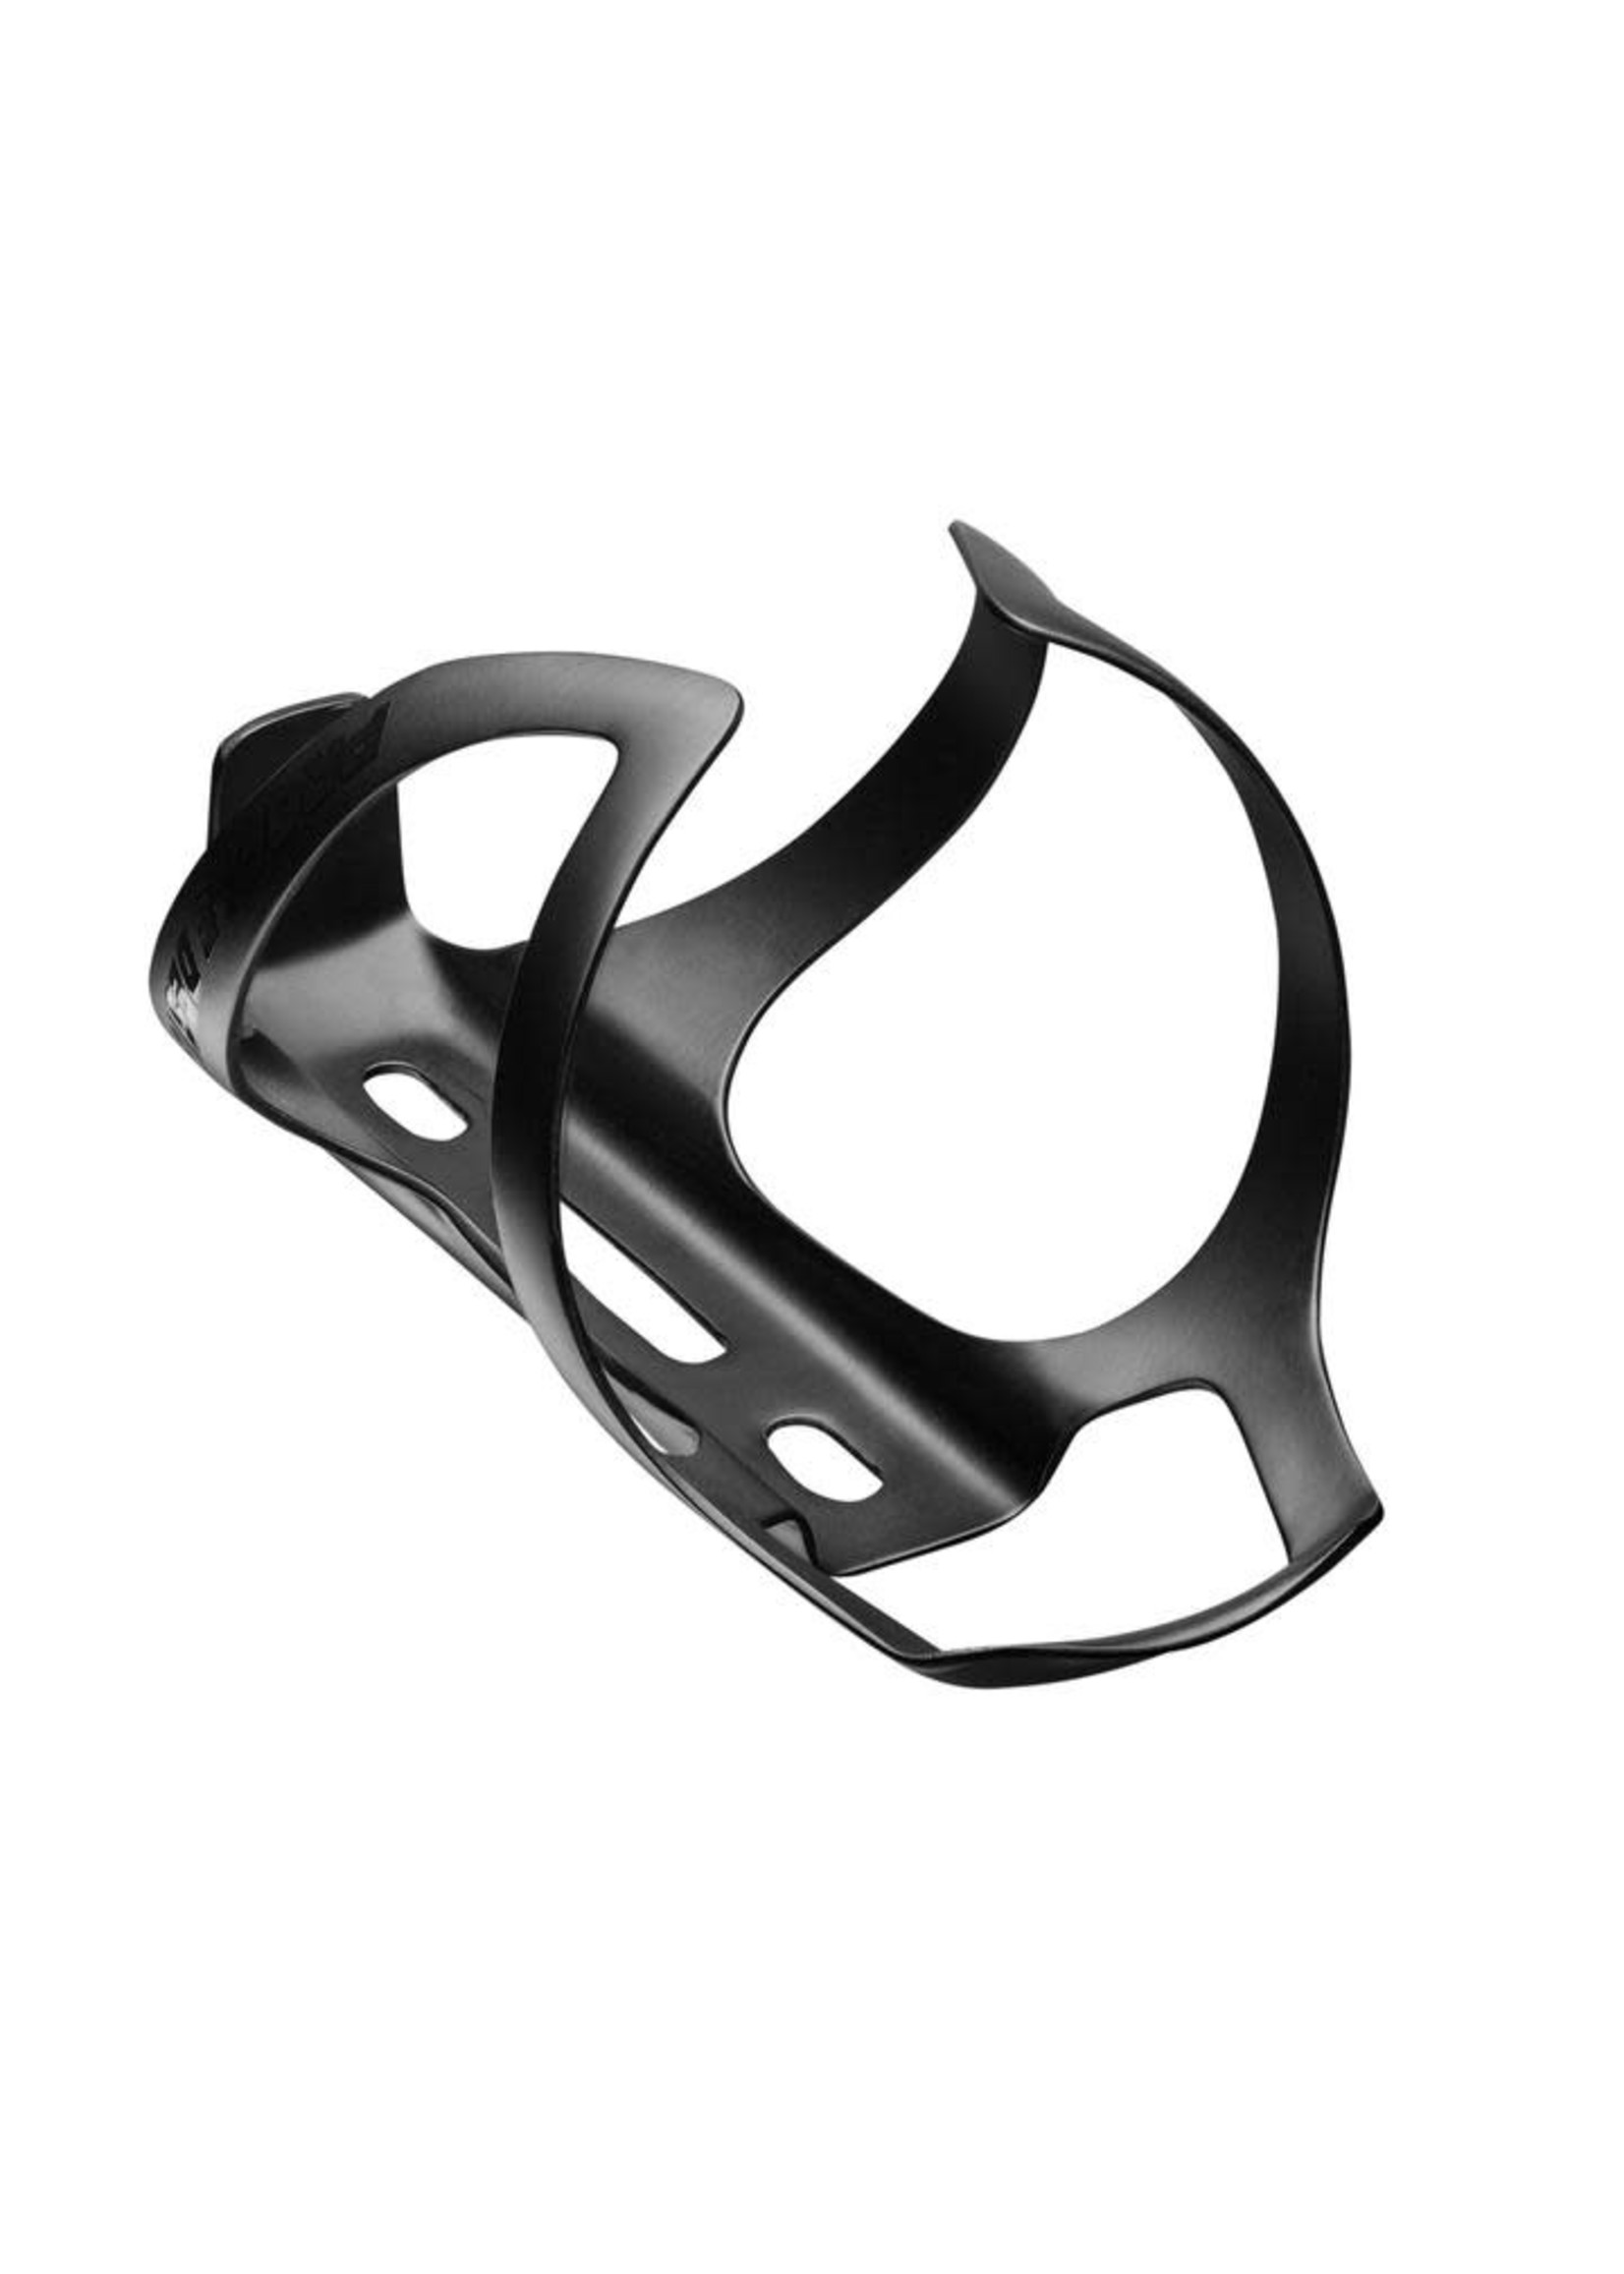 Profile Design AXIS ULTIMATE CARBON CAGE